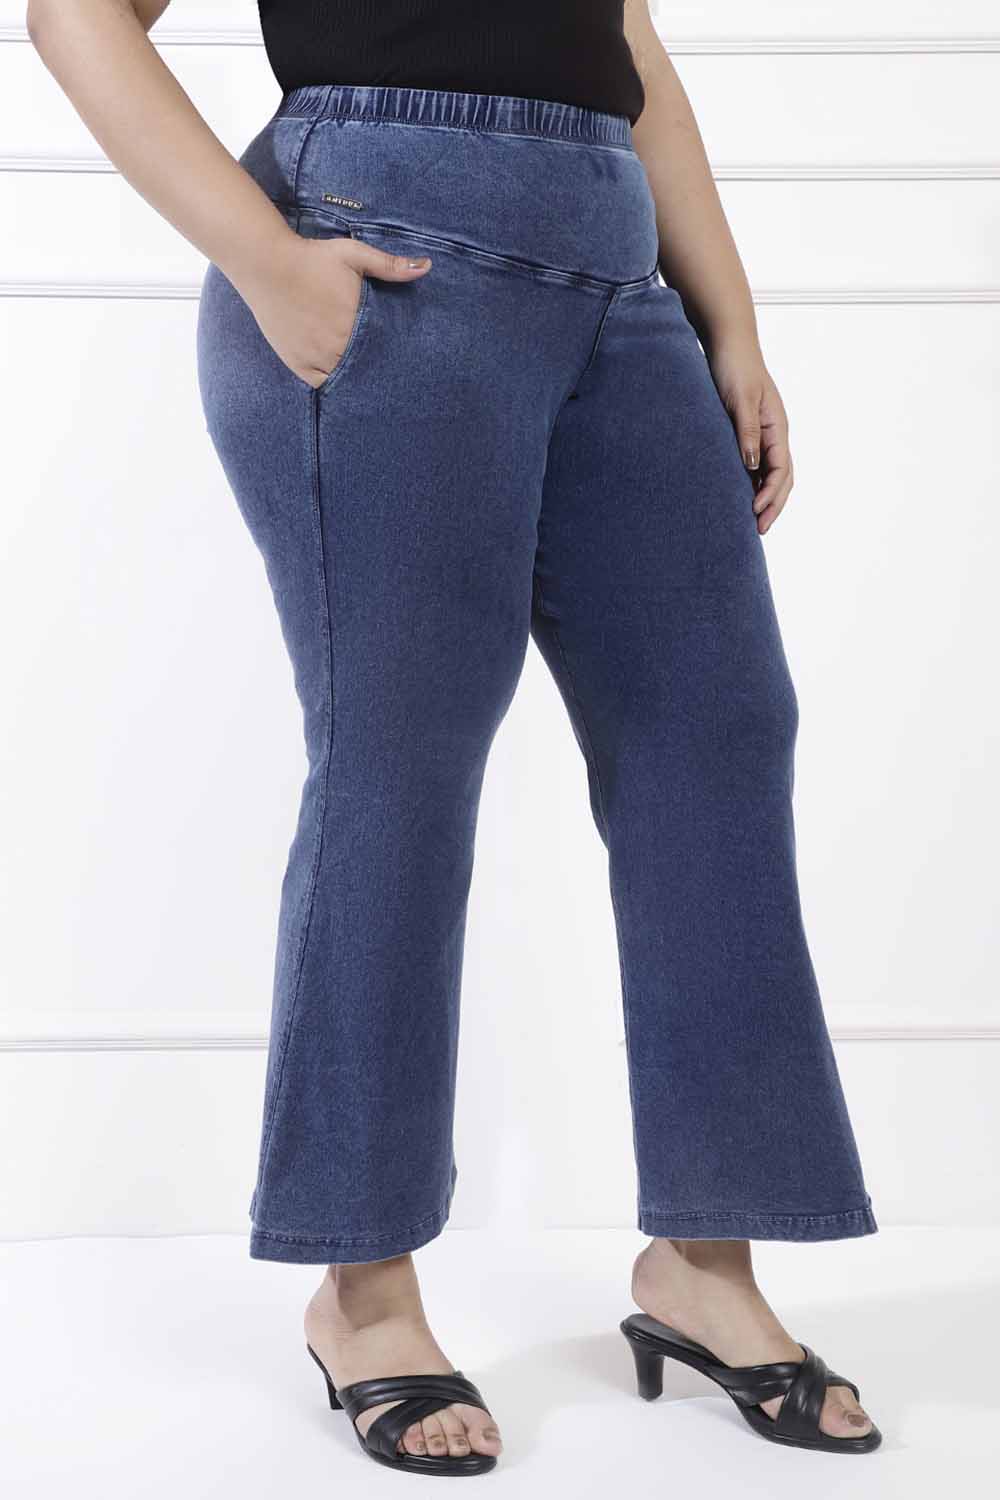 Yale Blue Flare Jeans for Women